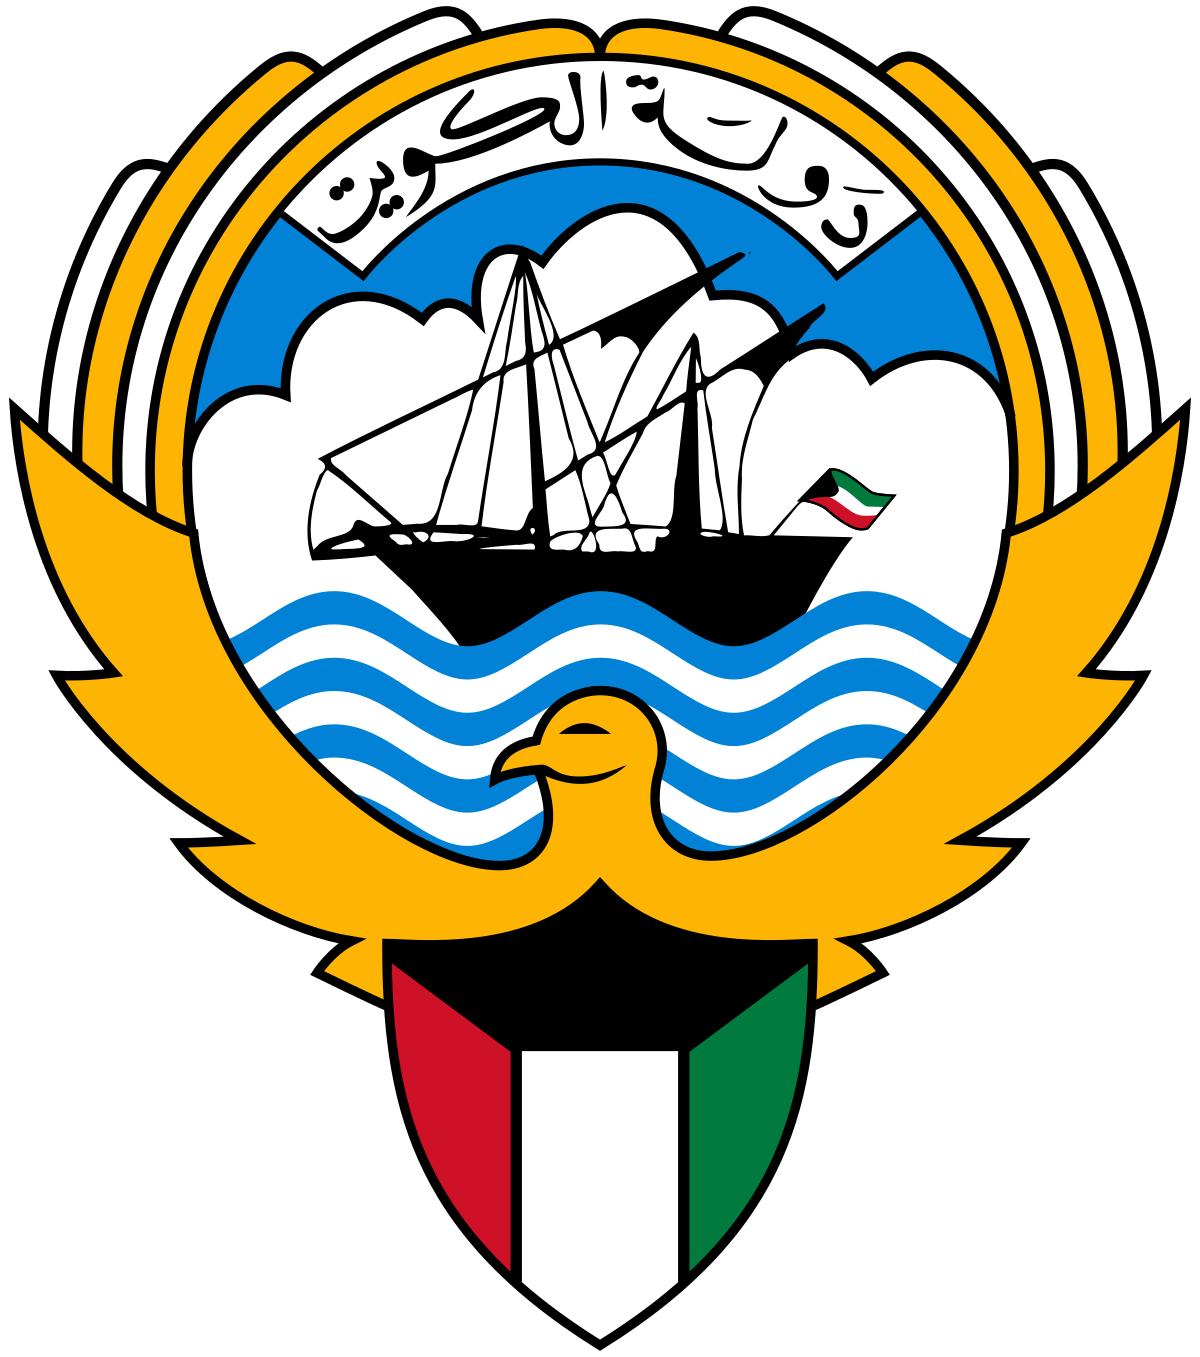 kuwait government online: Enabling Accessibility